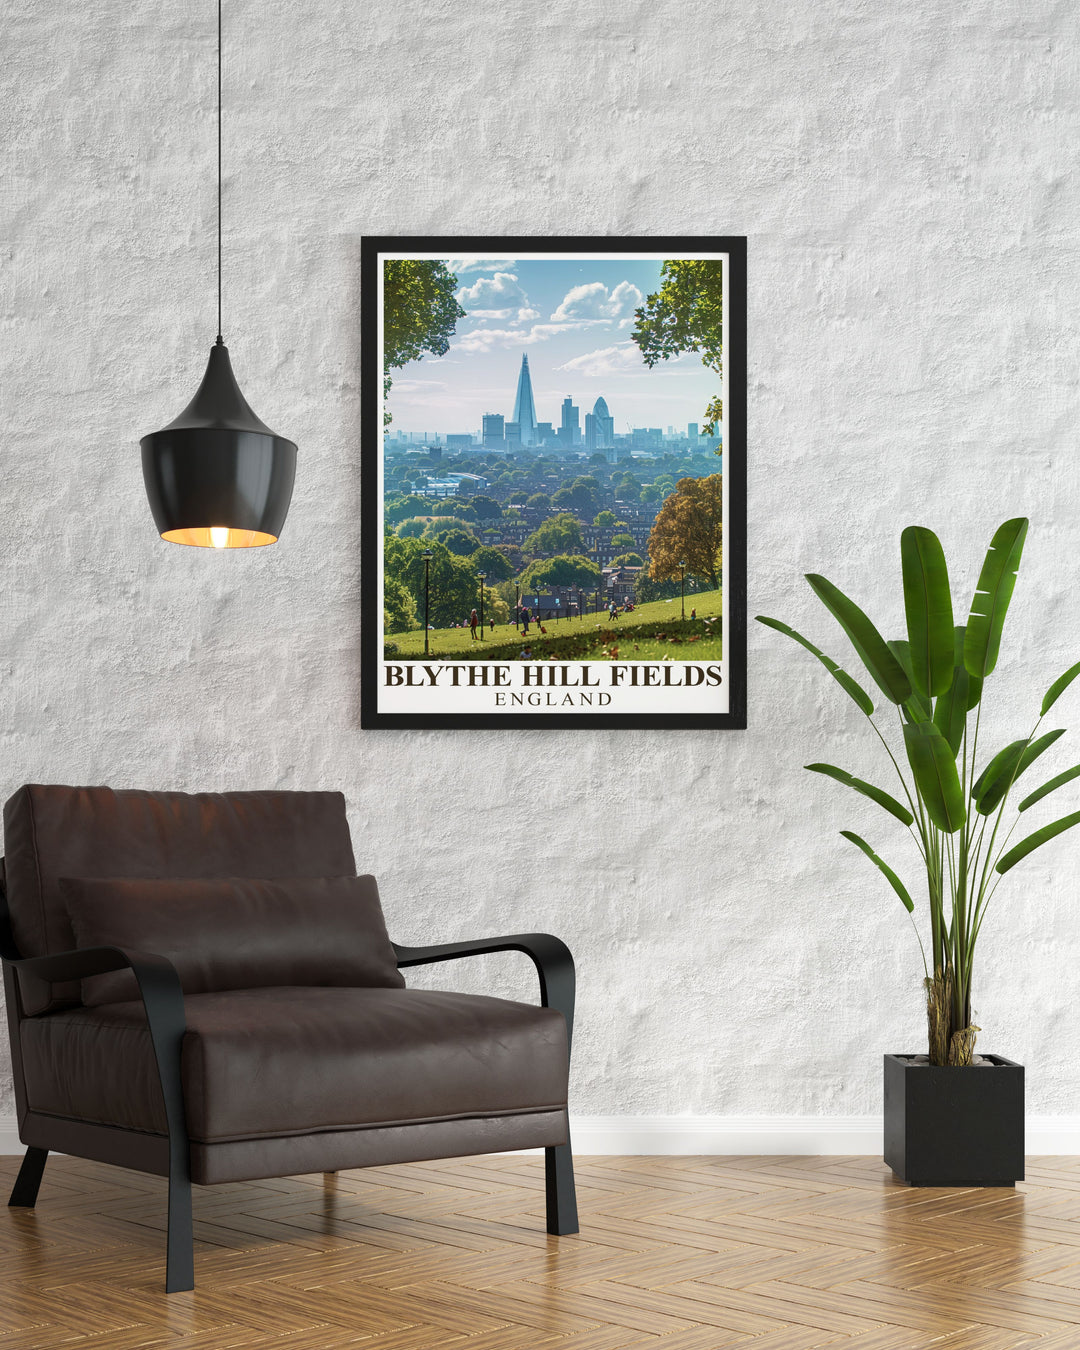 Capture the essence of South East Londons parks with this poster featuring Blythe Hill Fields stunning landscapes and panoramic views, perfect for enhancing any living space with its scenic charm.